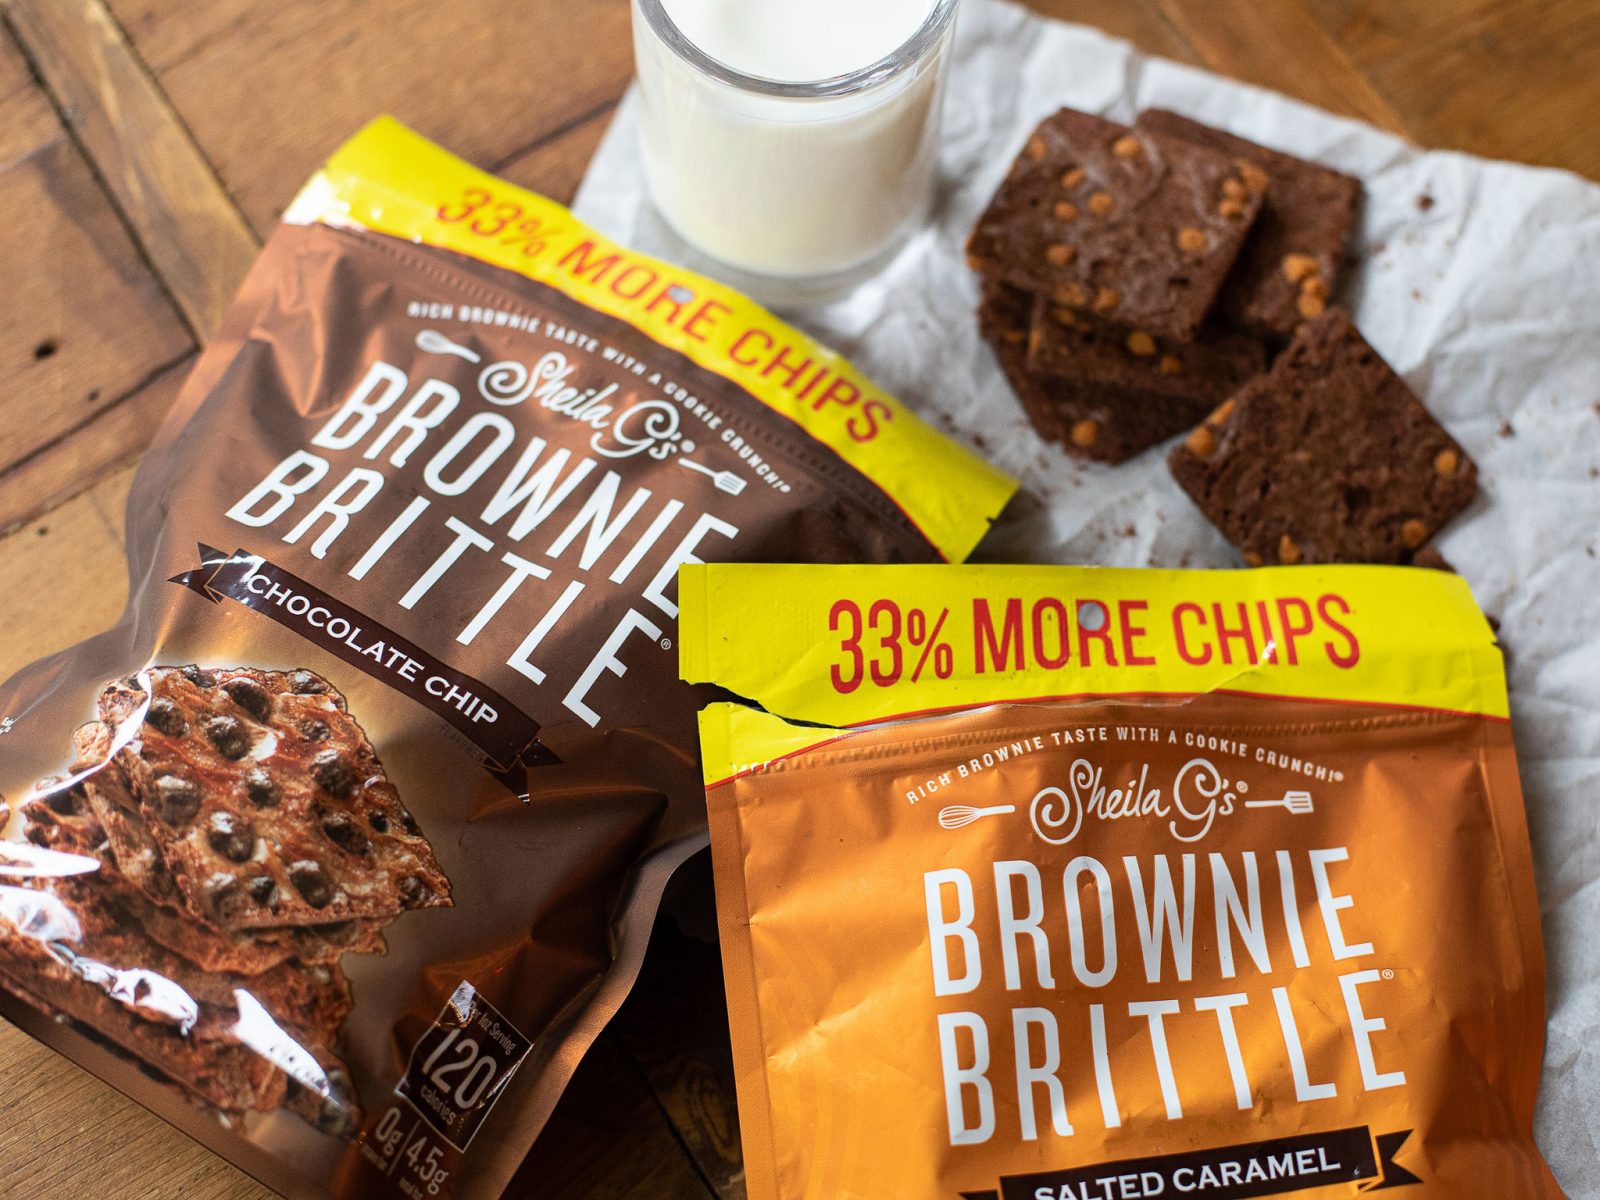 Sheila G's Brownie Brittle Just $2.59 At Publix on I Heart Publix